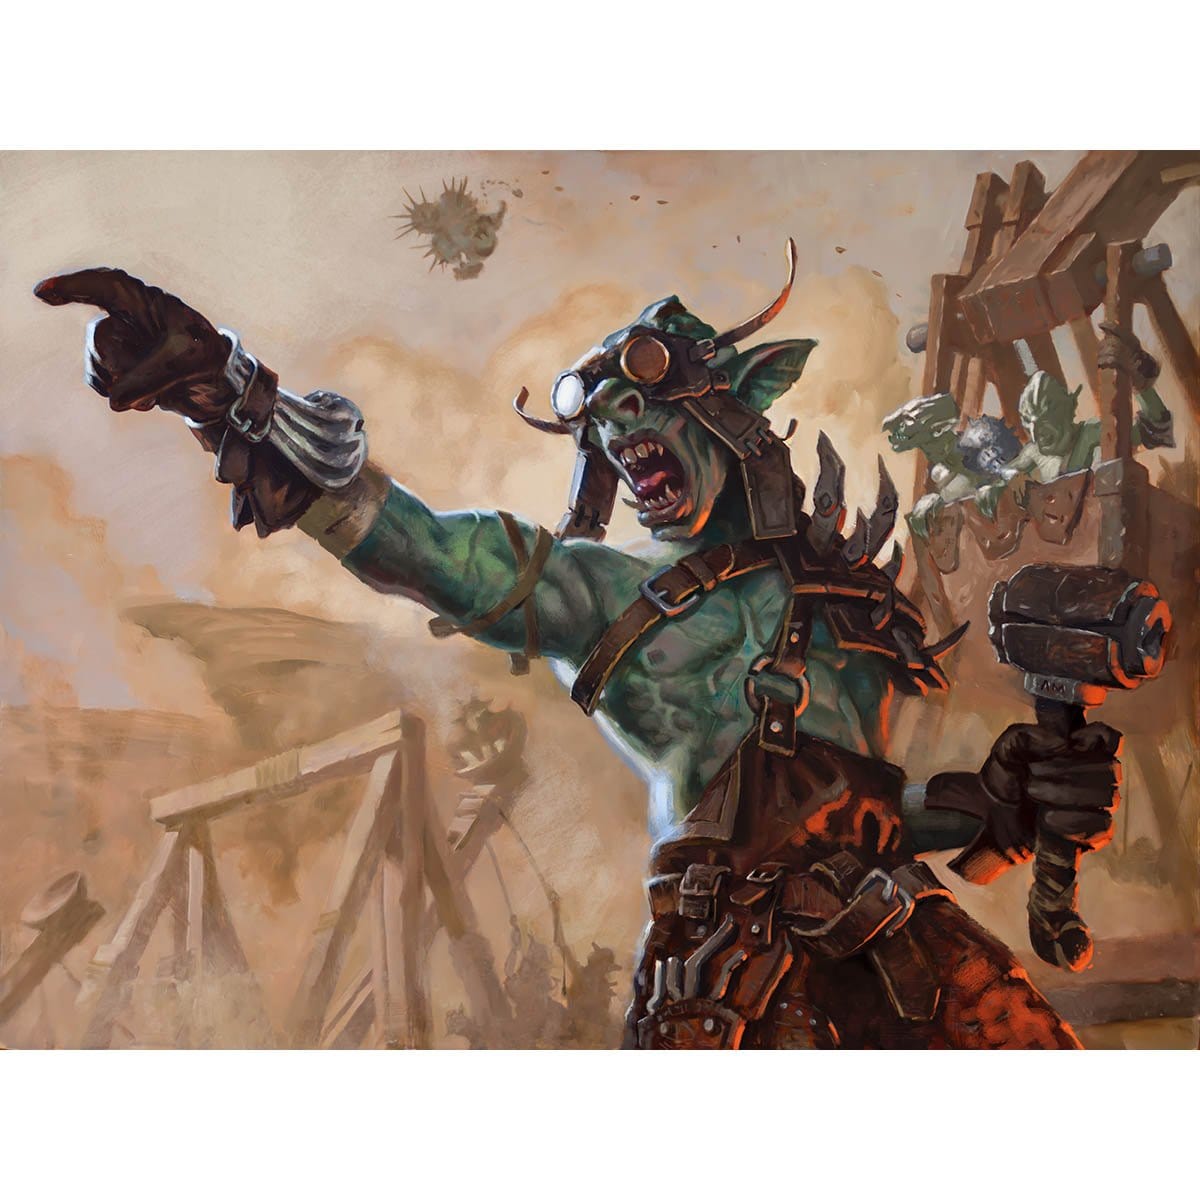 Siege-Gang Commander Print - Print - Original Magic Art - Accessories for Magic the Gathering and other card games